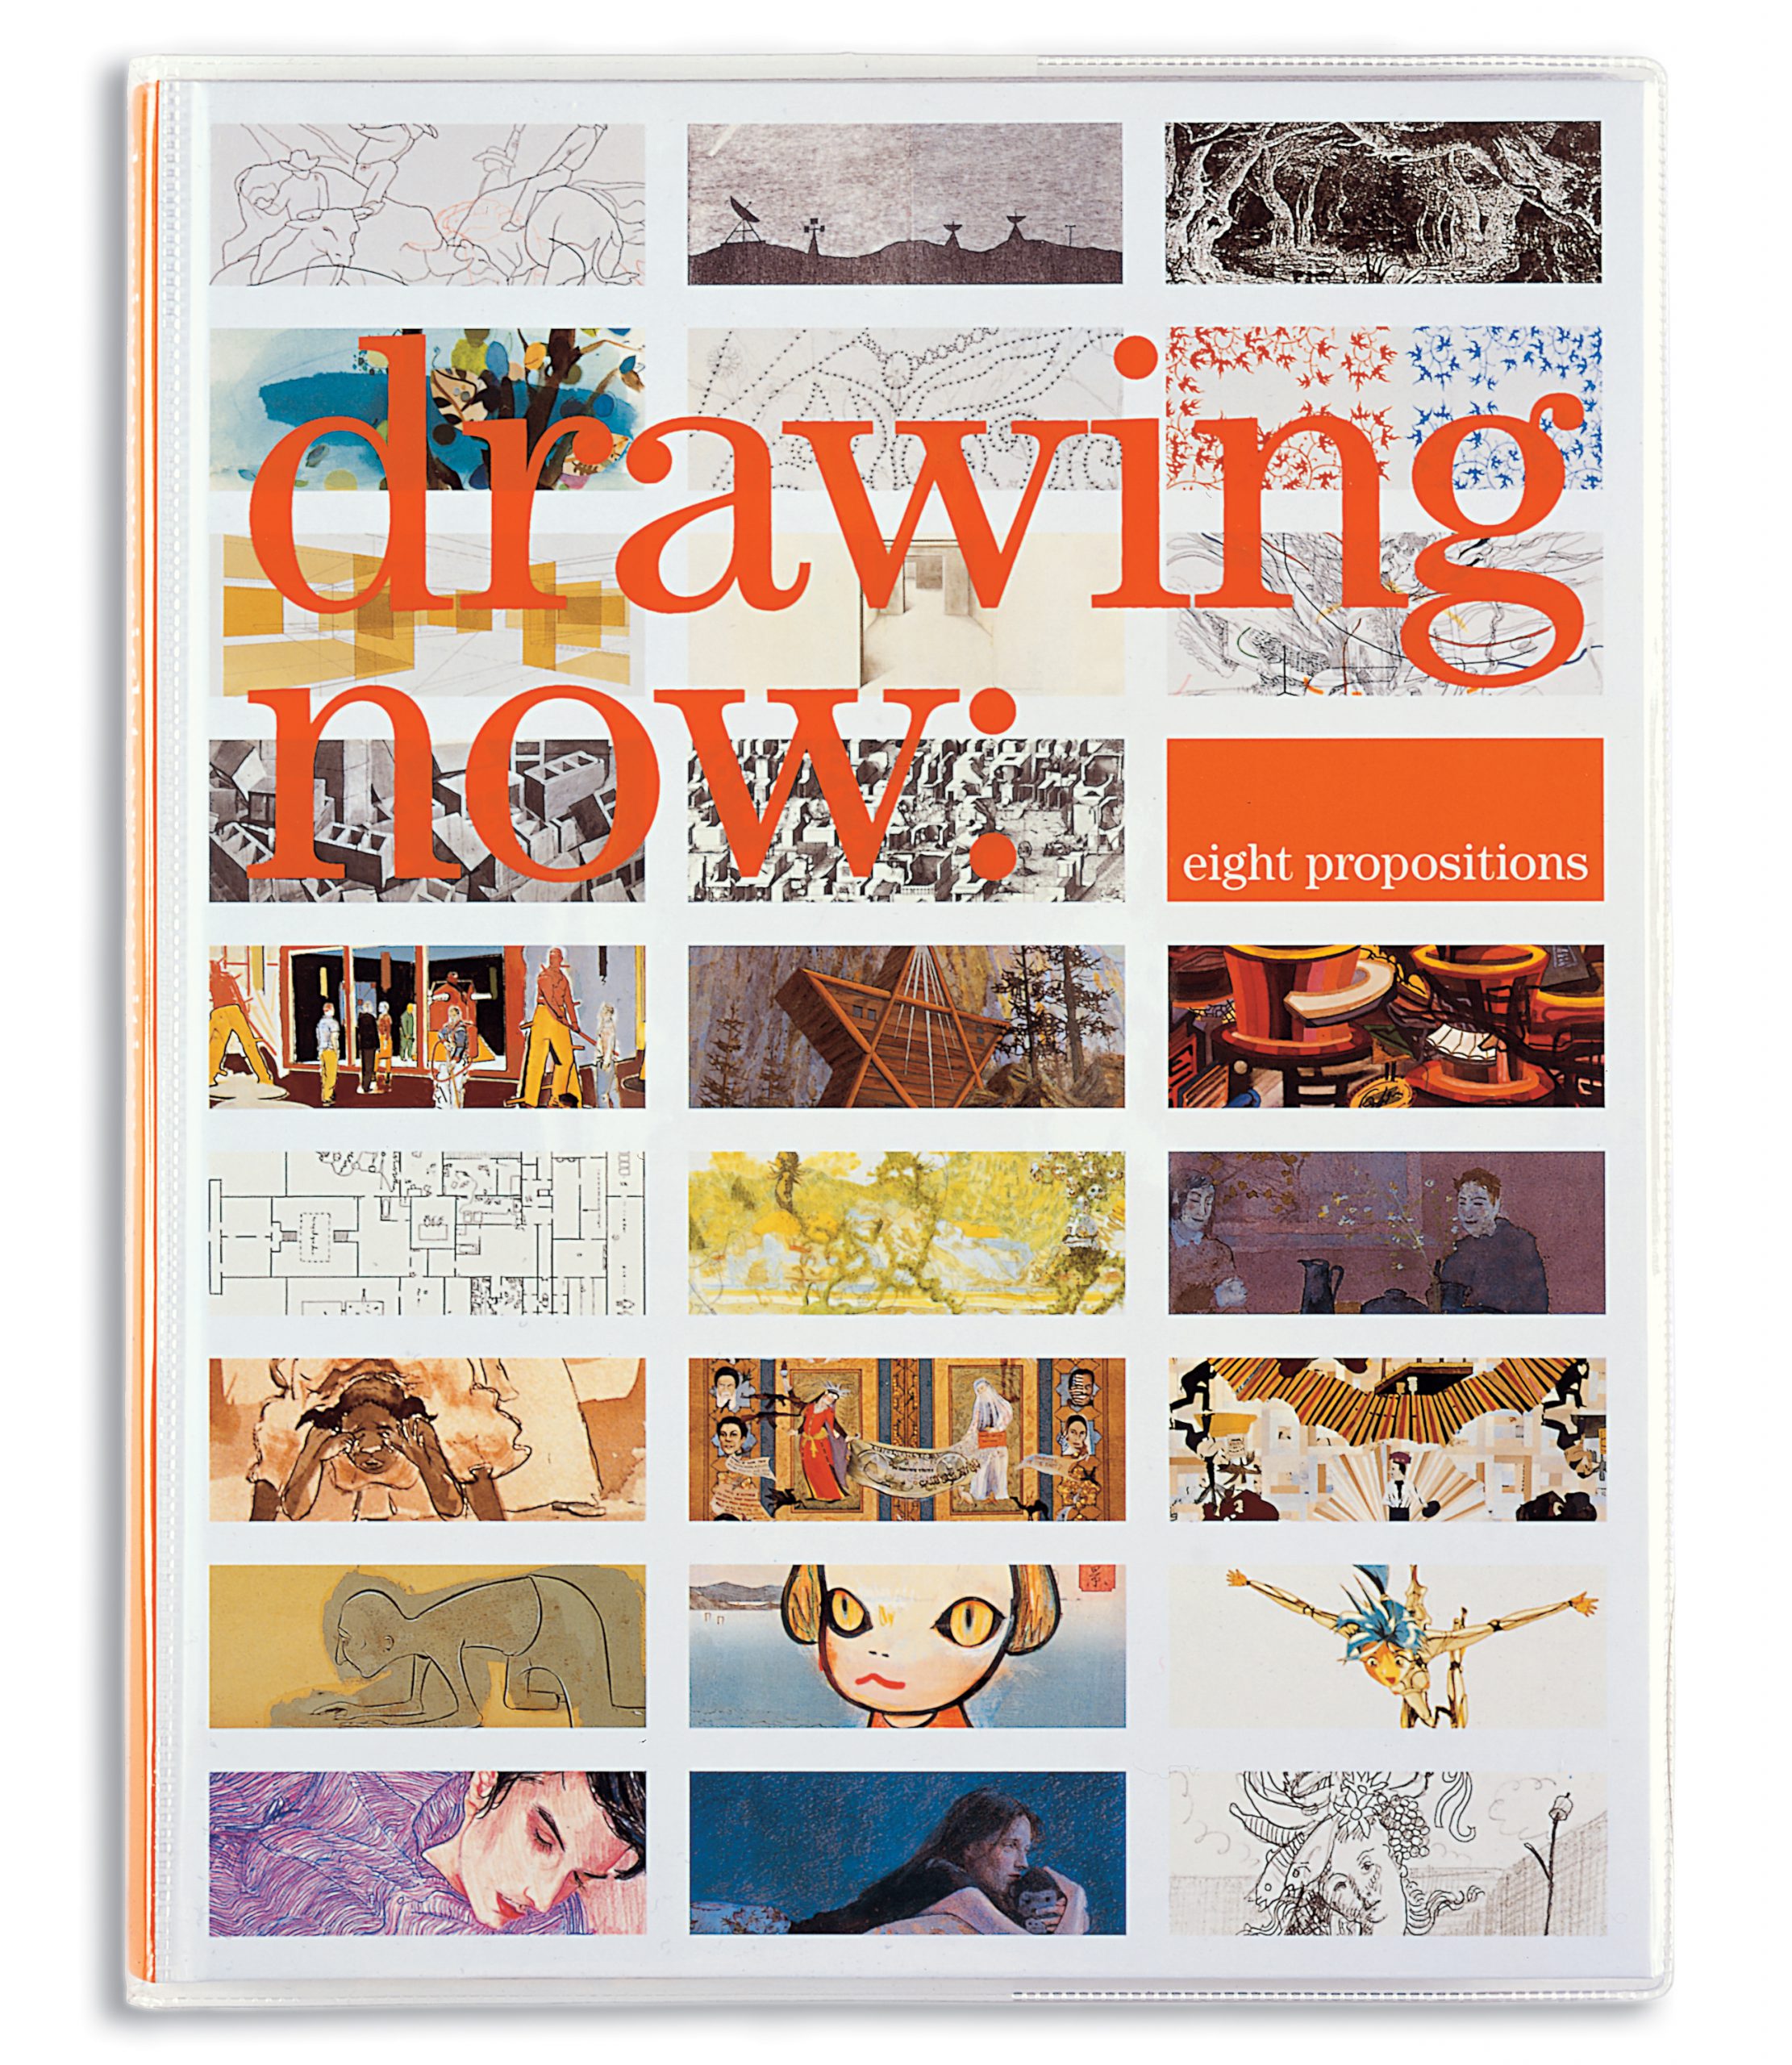 Project image 1 for "Drawing Now" Catalog, Museum of Modern Art, NY